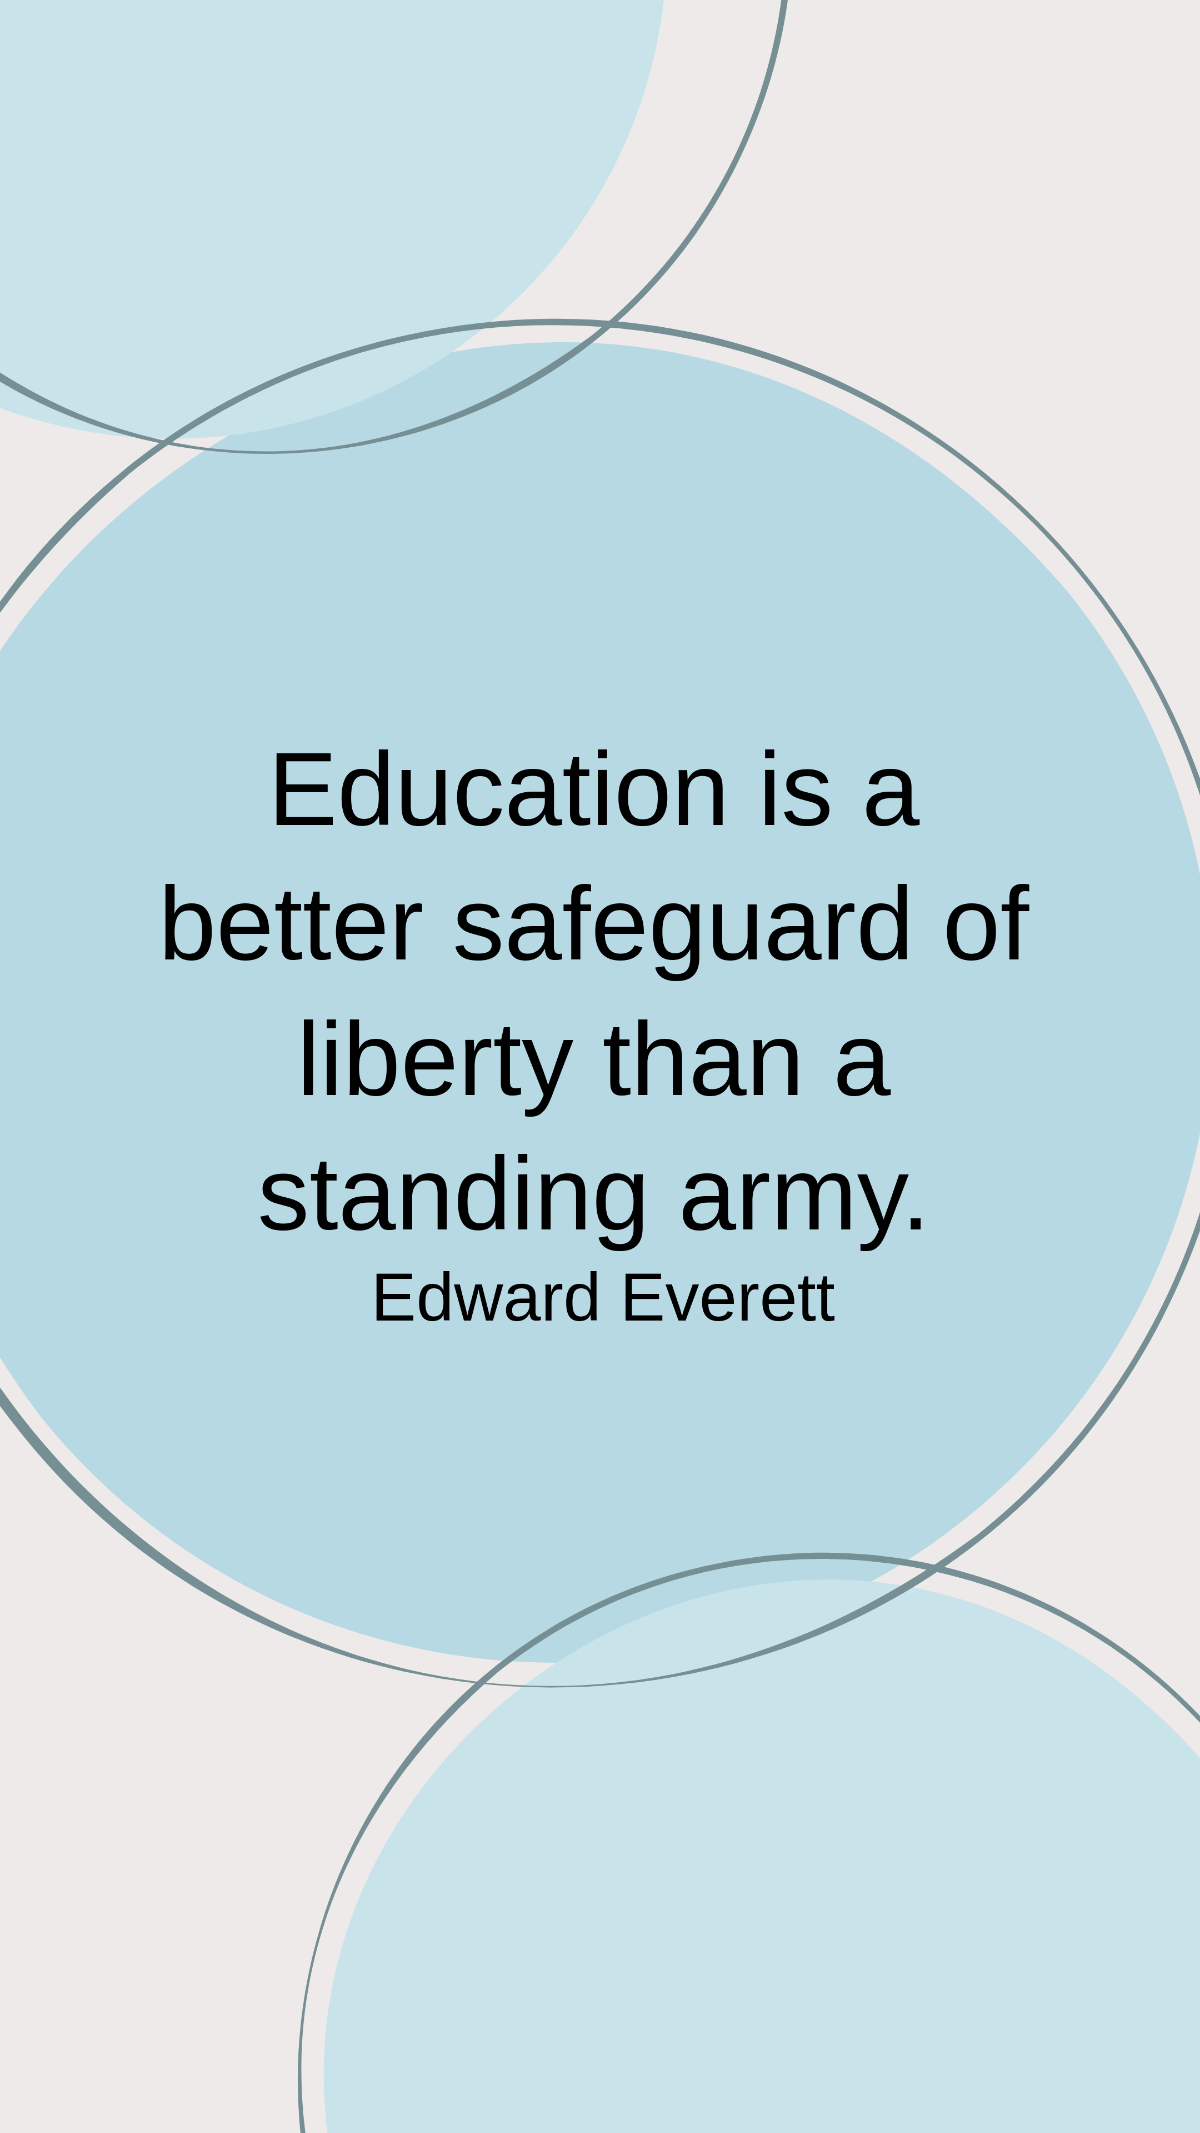 Edward Everett - Education is a better safeguard of liberty than a standing army.